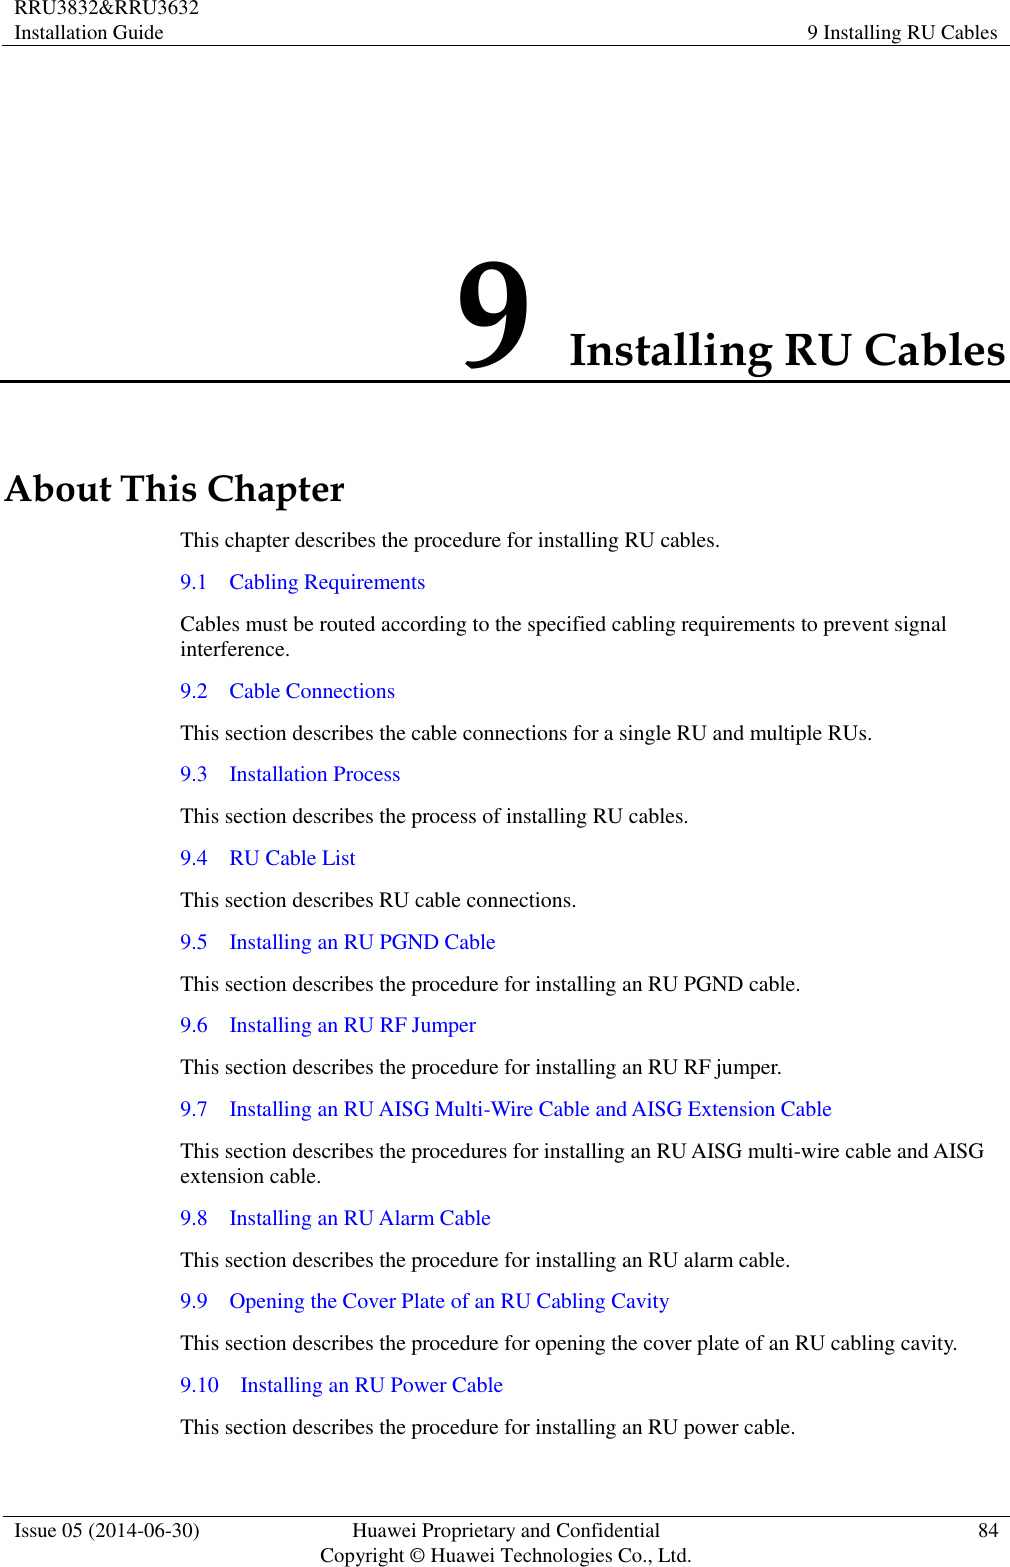 RRU3832&amp;RRU3632 Installation Guide 9 Installing RU Cables  Issue 05 (2014-06-30) Huawei Proprietary and Confidential                                     Copyright © Huawei Technologies Co., Ltd. 84  9 Installing RU Cables About This Chapter This chapter describes the procedure for installing RU cables.   9.1    Cabling Requirements Cables must be routed according to the specified cabling requirements to prevent signal interference. 9.2    Cable Connections This section describes the cable connections for a single RU and multiple RUs. 9.3    Installation Process This section describes the process of installing RU cables. 9.4    RU Cable List This section describes RU cable connections. 9.5    Installing an RU PGND Cable This section describes the procedure for installing an RU PGND cable. 9.6    Installing an RU RF Jumper This section describes the procedure for installing an RU RF jumper. 9.7    Installing an RU AISG Multi-Wire Cable and AISG Extension Cable This section describes the procedures for installing an RU AISG multi-wire cable and AISG extension cable. 9.8    Installing an RU Alarm Cable This section describes the procedure for installing an RU alarm cable. 9.9    Opening the Cover Plate of an RU Cabling Cavity This section describes the procedure for opening the cover plate of an RU cabling cavity. 9.10    Installing an RU Power Cable This section describes the procedure for installing an RU power cable. 